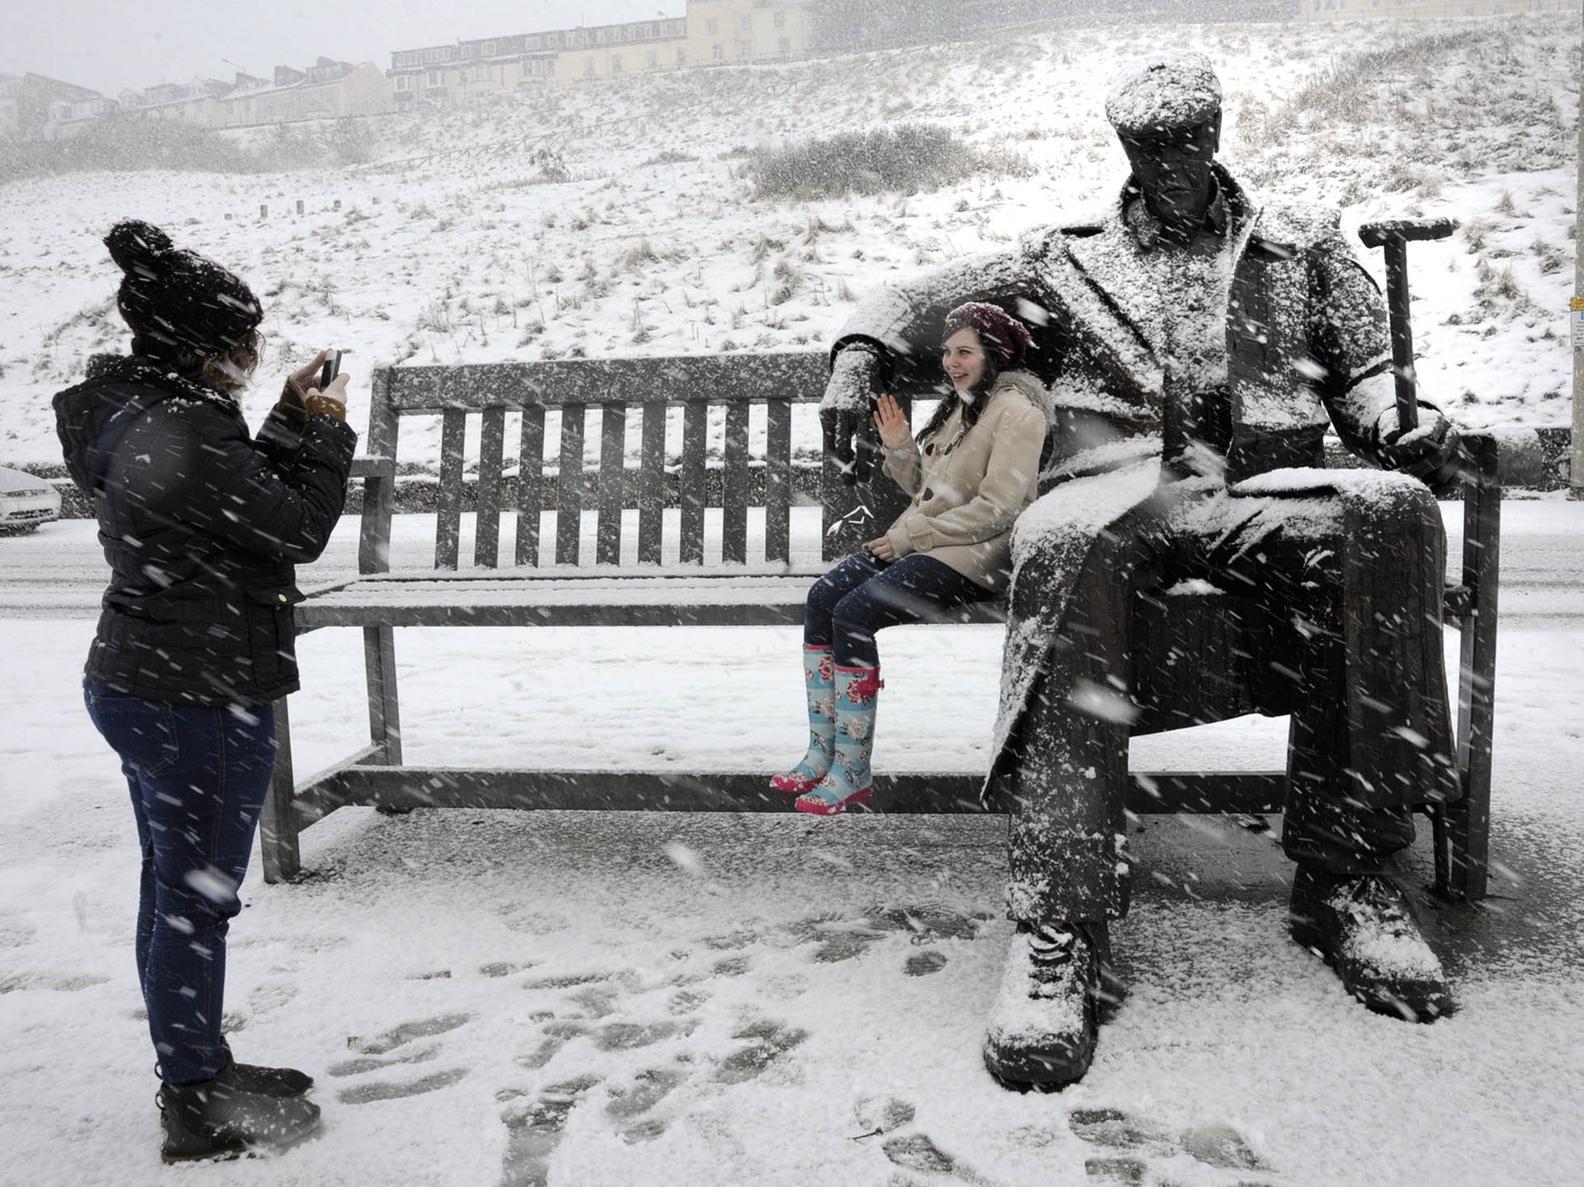 Amy Hunter, left, from Scarborough, takes photos of her friend Becca Hudless, sitting with a snow covered Freddie sculpture on the North Bay in 2013.